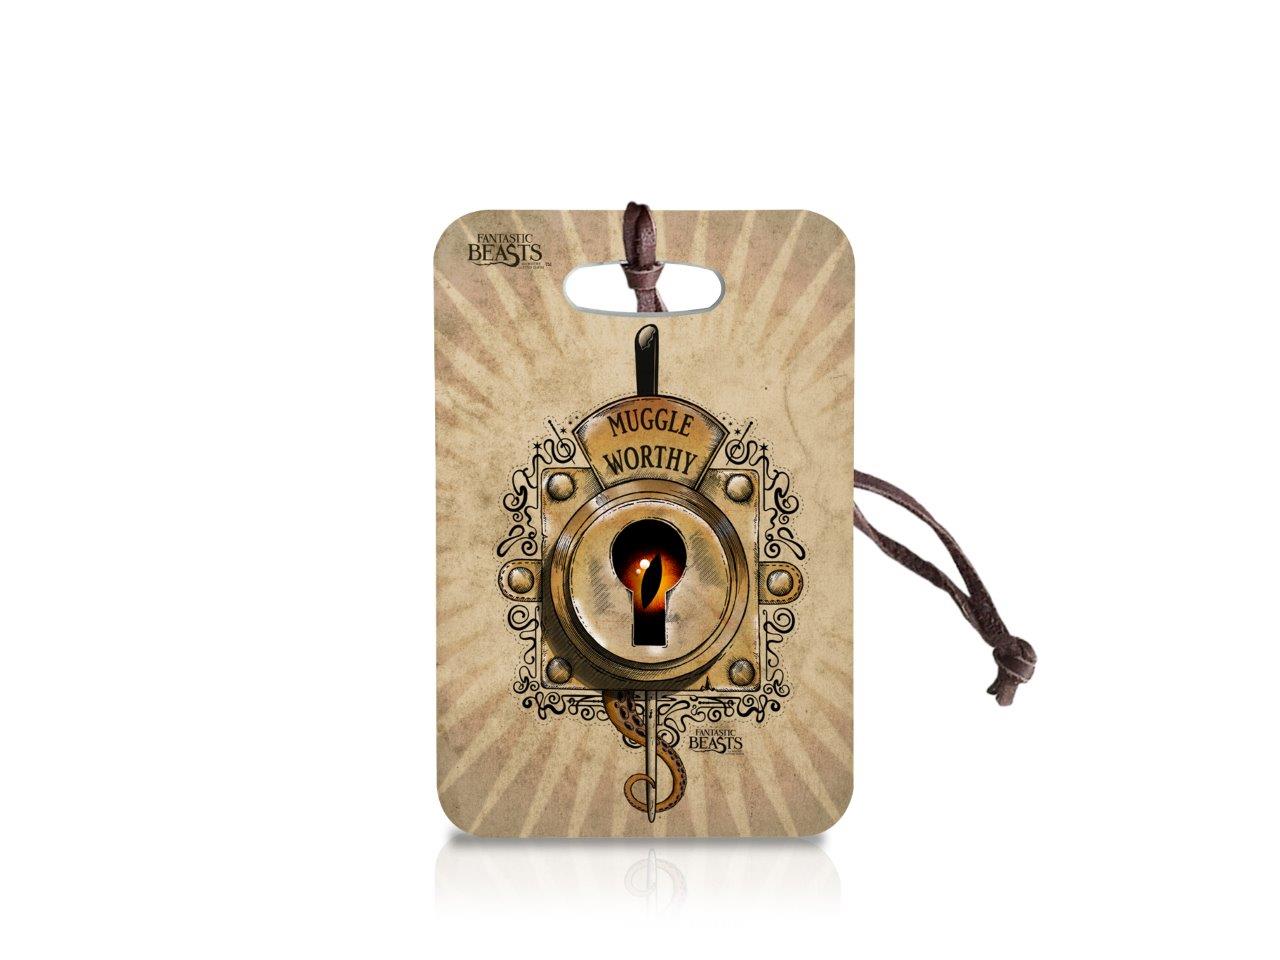 Fantastic Beasts and Where to Find Them (Muggle Worthy) Luggage Tag LTREC018